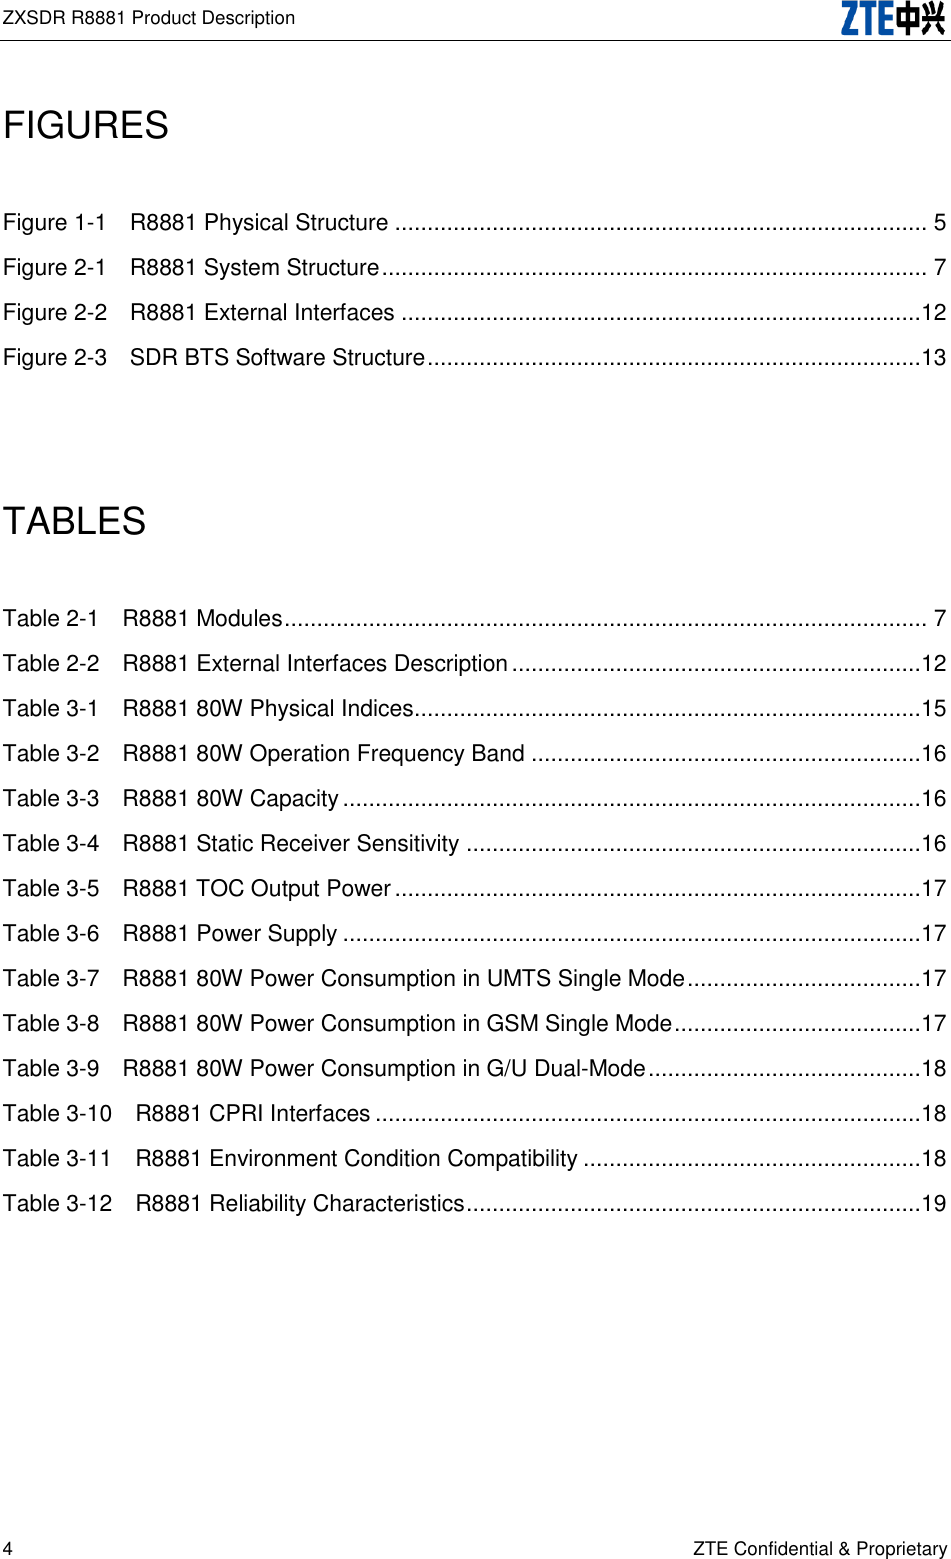 ZXSDR R8881 Product Description   4 ZTE Confidential &amp; Proprietary FIGURES Figure 1-1    R8881 Physical Structure .................................................................................. 5 Figure 2-1    R8881 System Structure .................................................................................... 7 Figure 2-2    R8881 External Interfaces ................................................................................12 Figure 2-3    SDR BTS Software Structure ............................................................................13  TABLES Table 2-1    R8881 Modules ................................................................................................... 7 Table 2-2    R8881 External Interfaces Description ...............................................................12 Table 3-1    R8881 80W Physical Indices..............................................................................15 Table 3-2    R8881 80W Operation Frequency Band ............................................................16 Table 3-3    R8881 80W Capacity .........................................................................................16 Table 3-4    R8881 Static Receiver Sensitivity ......................................................................16 Table 3-5    R8881 TOC Output Power .................................................................................17 Table 3-6    R8881 Power Supply .........................................................................................17 Table 3-7    R8881 80W Power Consumption in UMTS Single Mode ....................................17 Table 3-8    R8881 80W Power Consumption in GSM Single Mode ......................................17 Table 3-9    R8881 80W Power Consumption in G/U Dual-Mode ..........................................18 Table 3-10    R8881 CPRI Interfaces ....................................................................................18 Table 3-11    R8881 Environment Condition Compatibility ....................................................18 Table 3-12    R8881 Reliability Characteristics ......................................................................19   